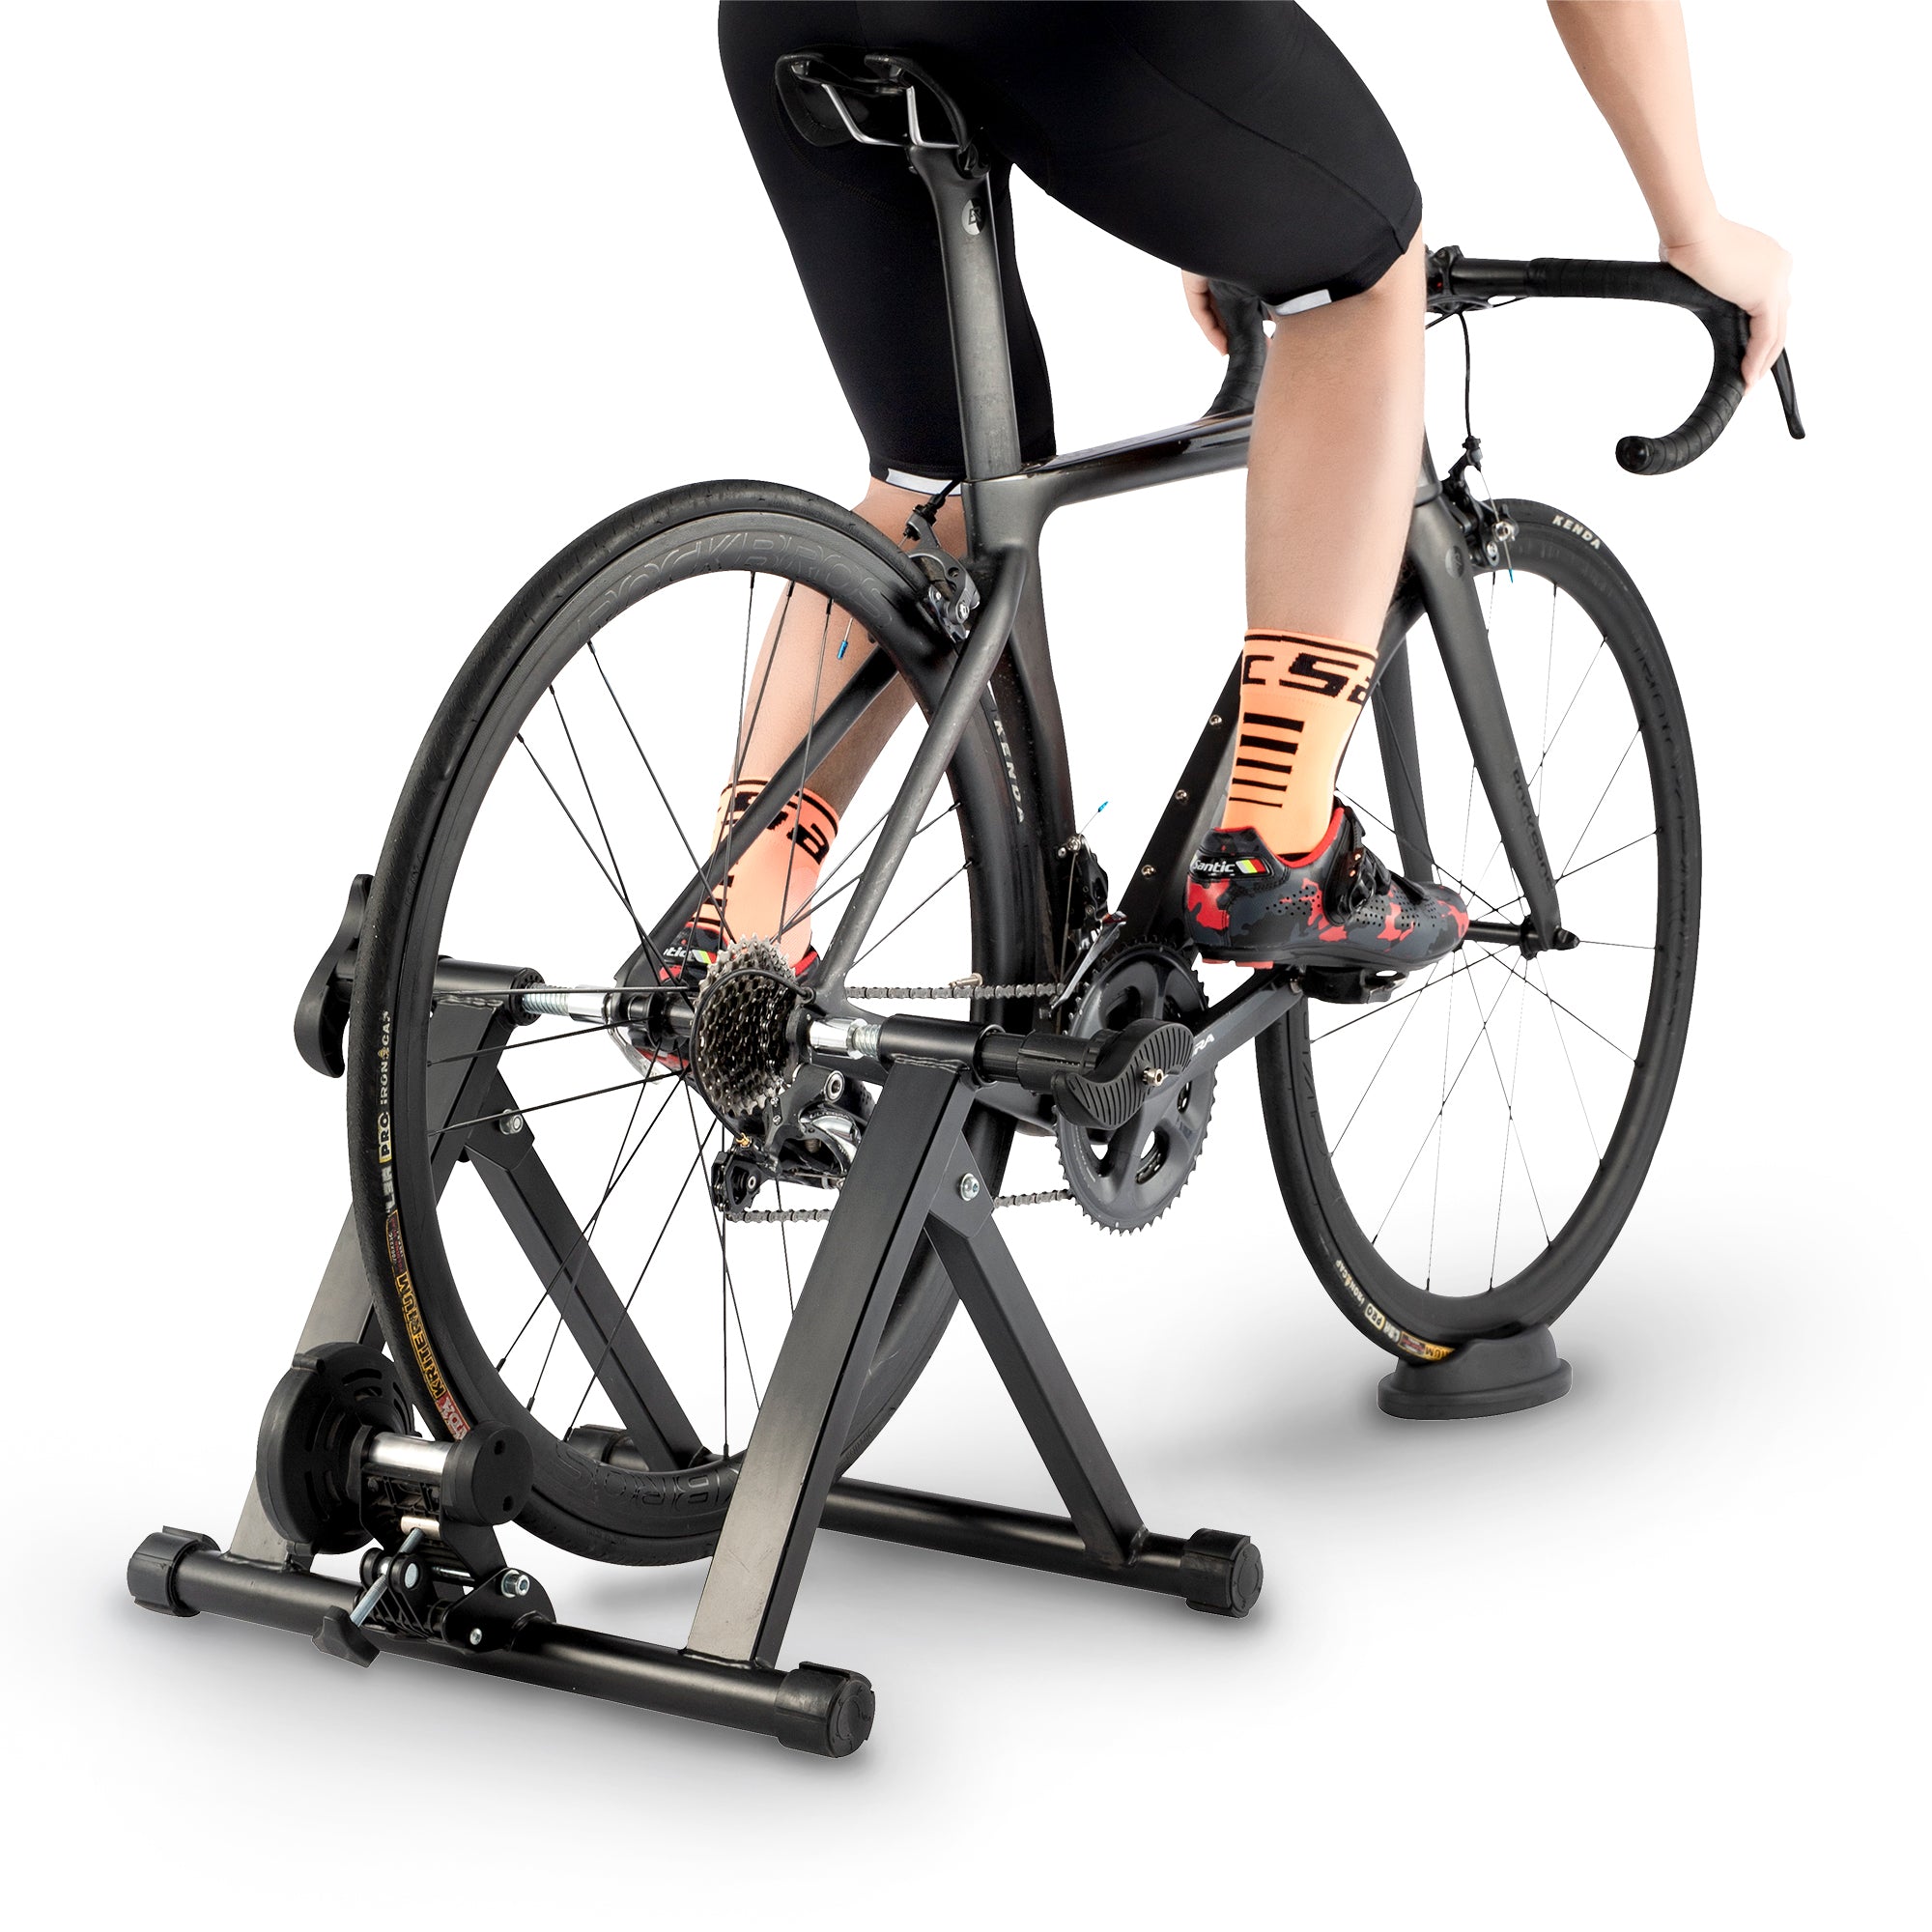 ROCKBROS Foldable Bike Trainer Stand for Indoor Cycling Exercise